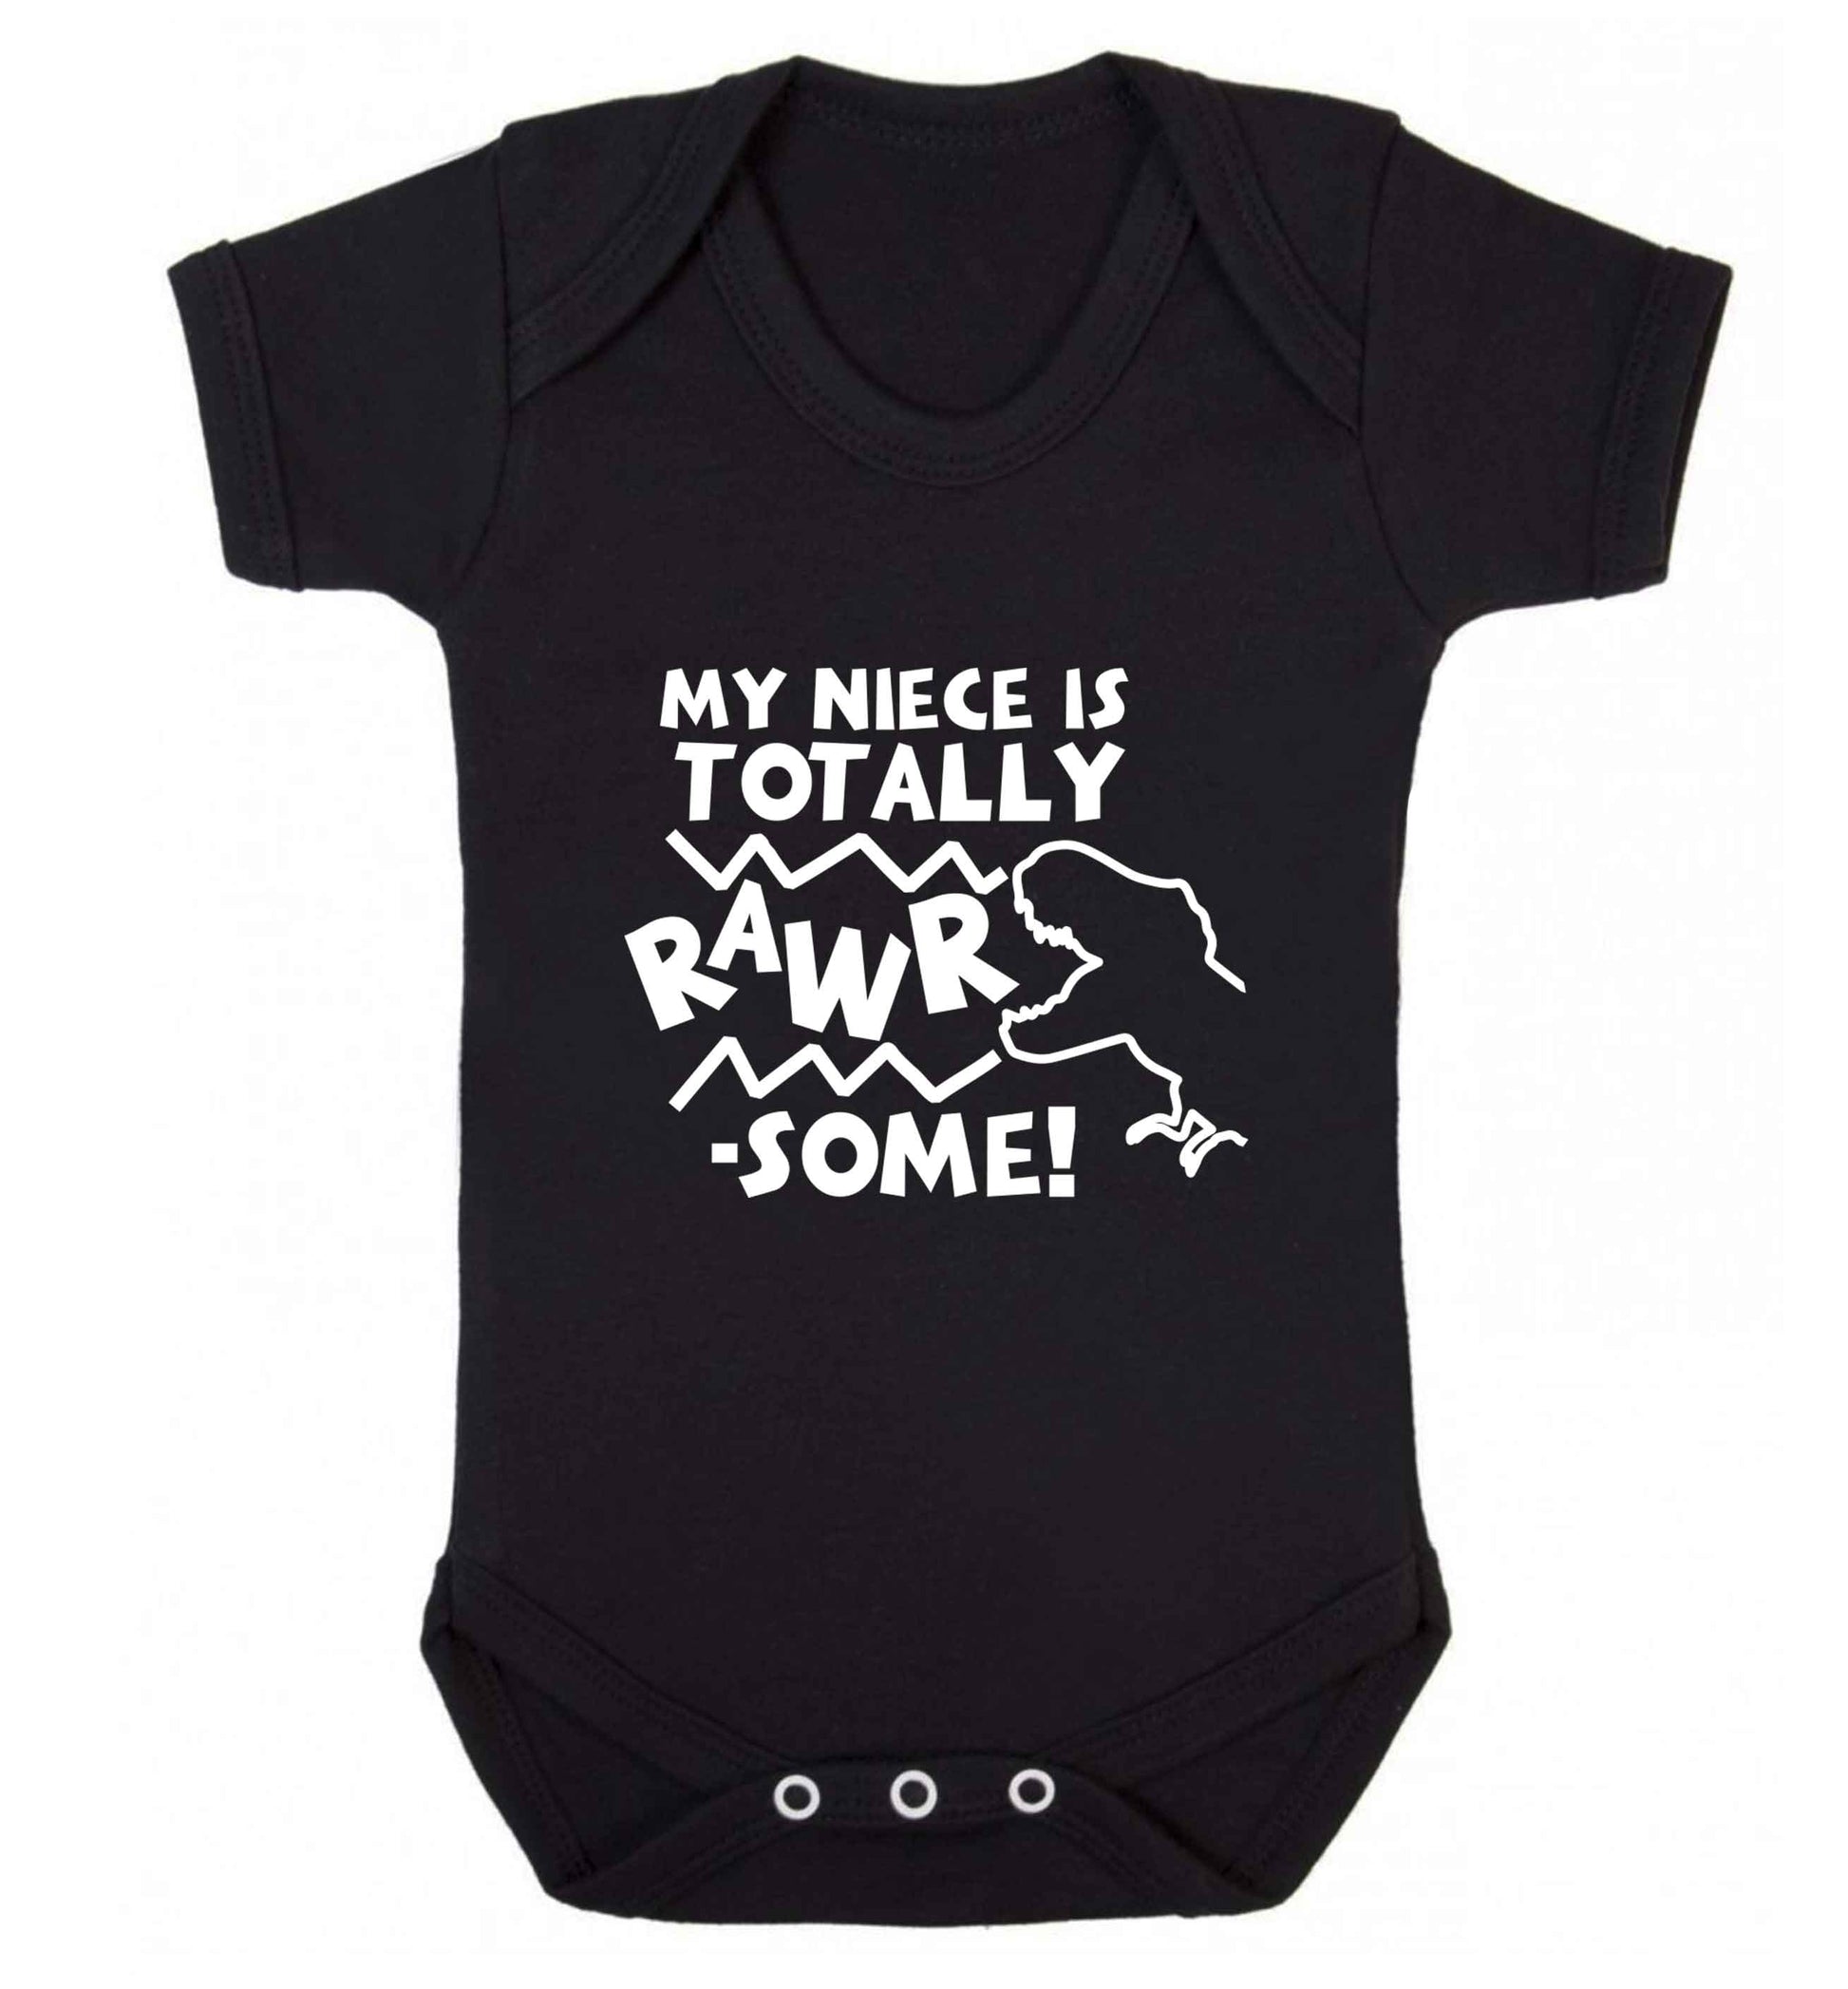 My niece is totally rawrsome baby vest black 18-24 months